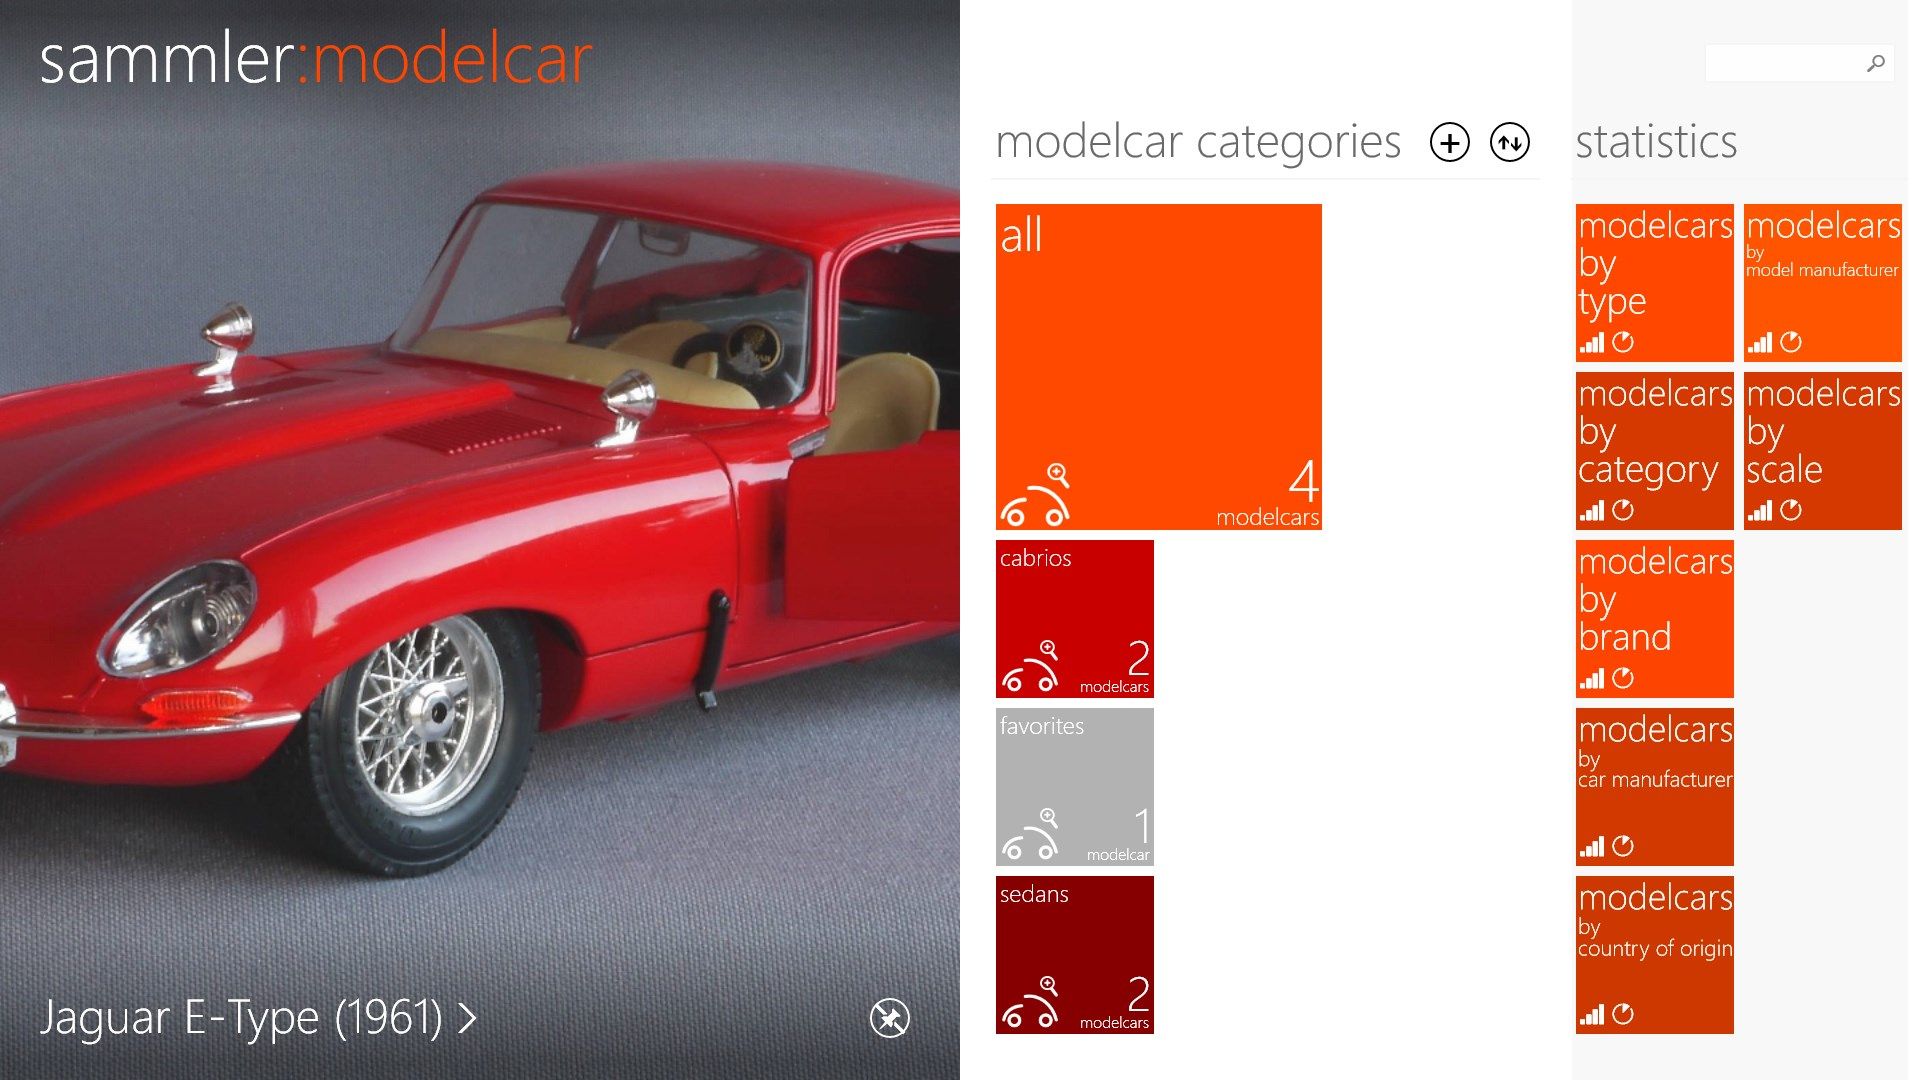 Homepage with user-defined model car categories and information about the collection